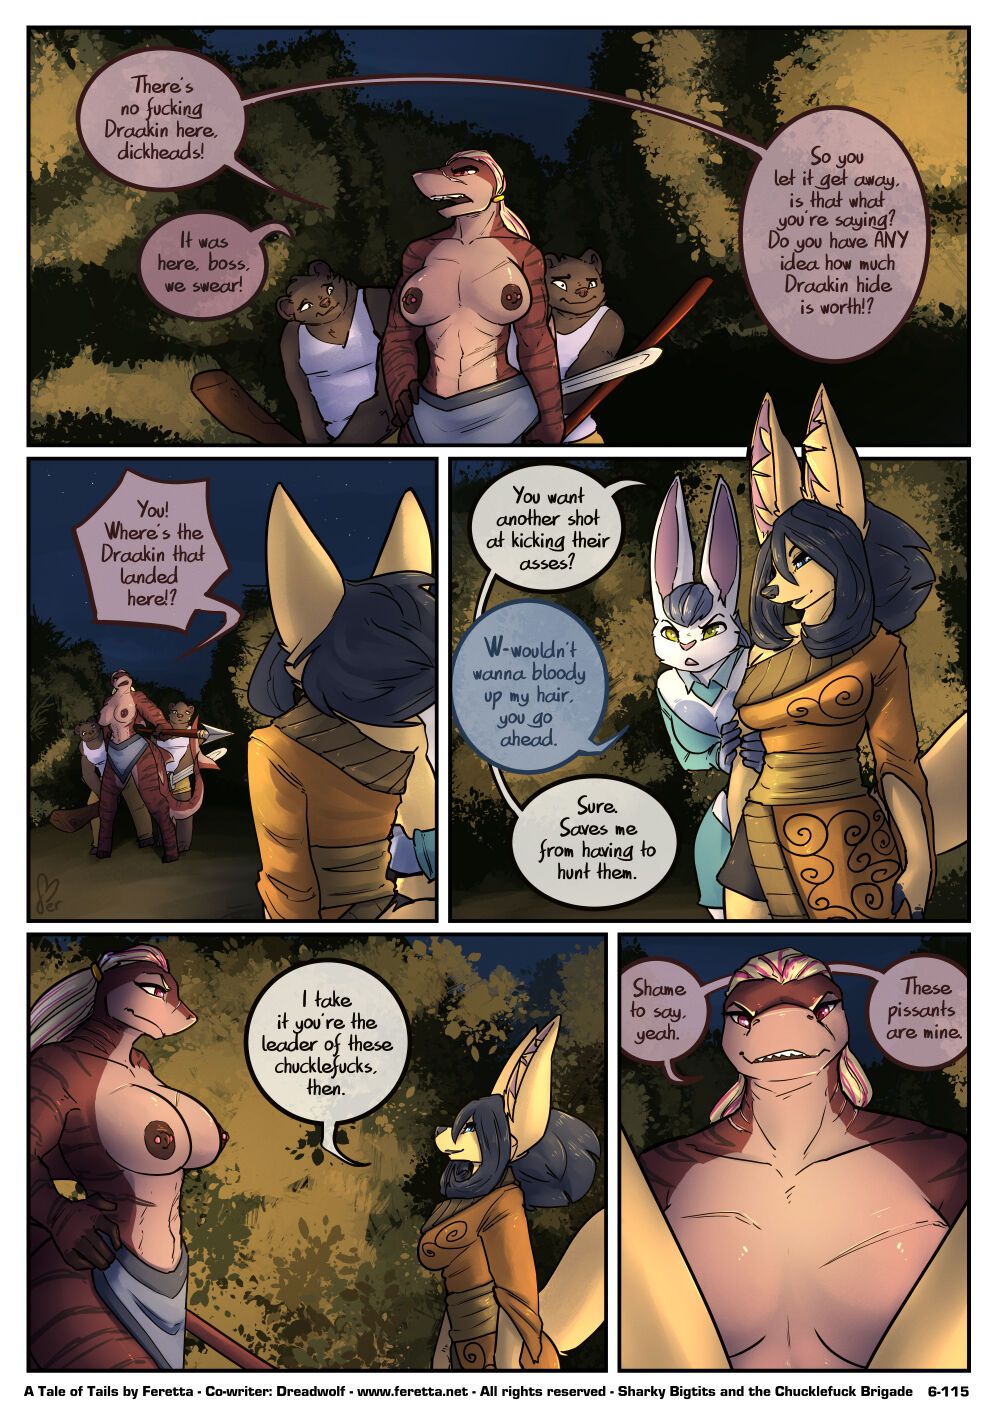 [Feretta] A Tale of Tails: Chapter 6 - Paths converge (ongoing) 118